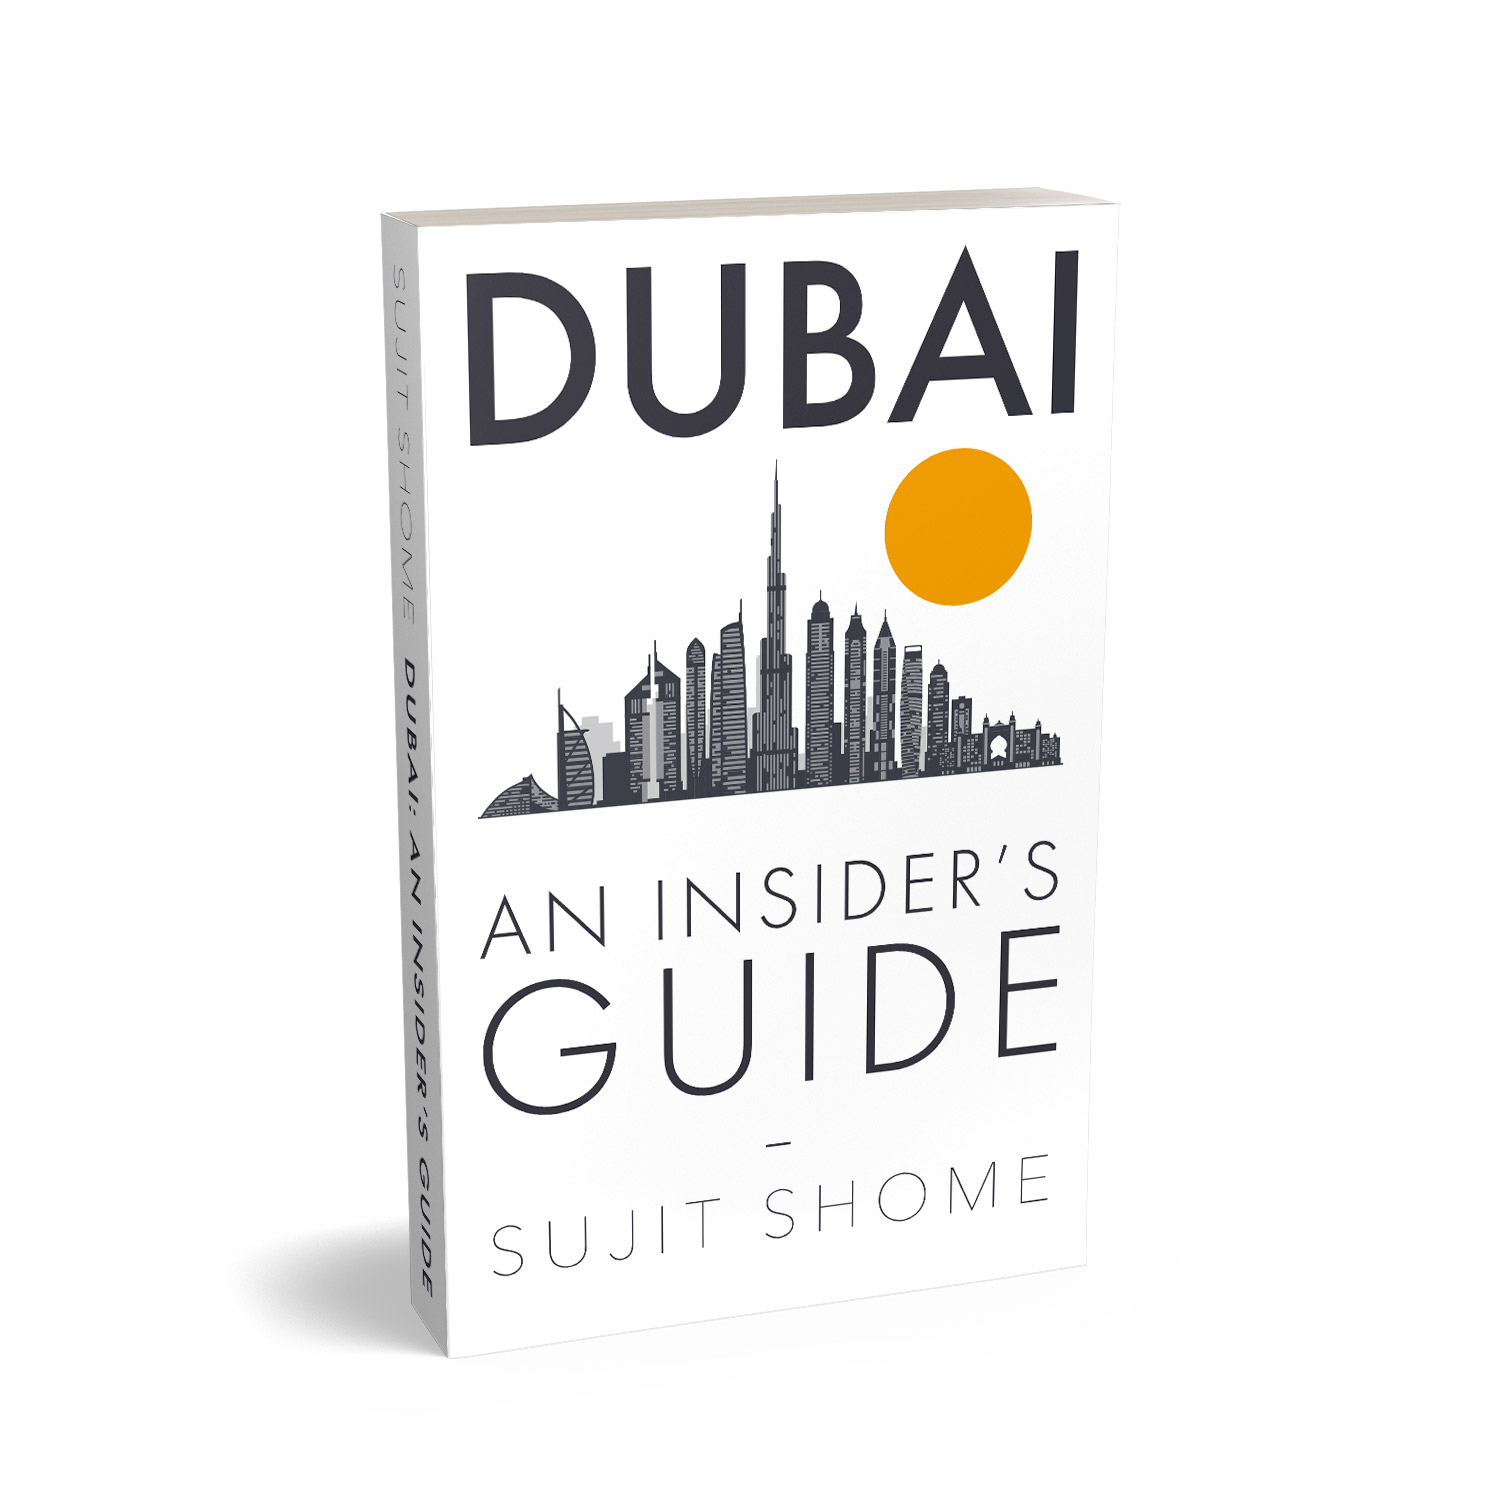 'Dubai: An Insider's Guide' is an informed review to one of the busiest cities in the Middle East. The author is Sujit Shome. The book cover and interior were designed by Mark Thomas, of coverness.com. To find out more about my book design services, please visit www.coverness.com.